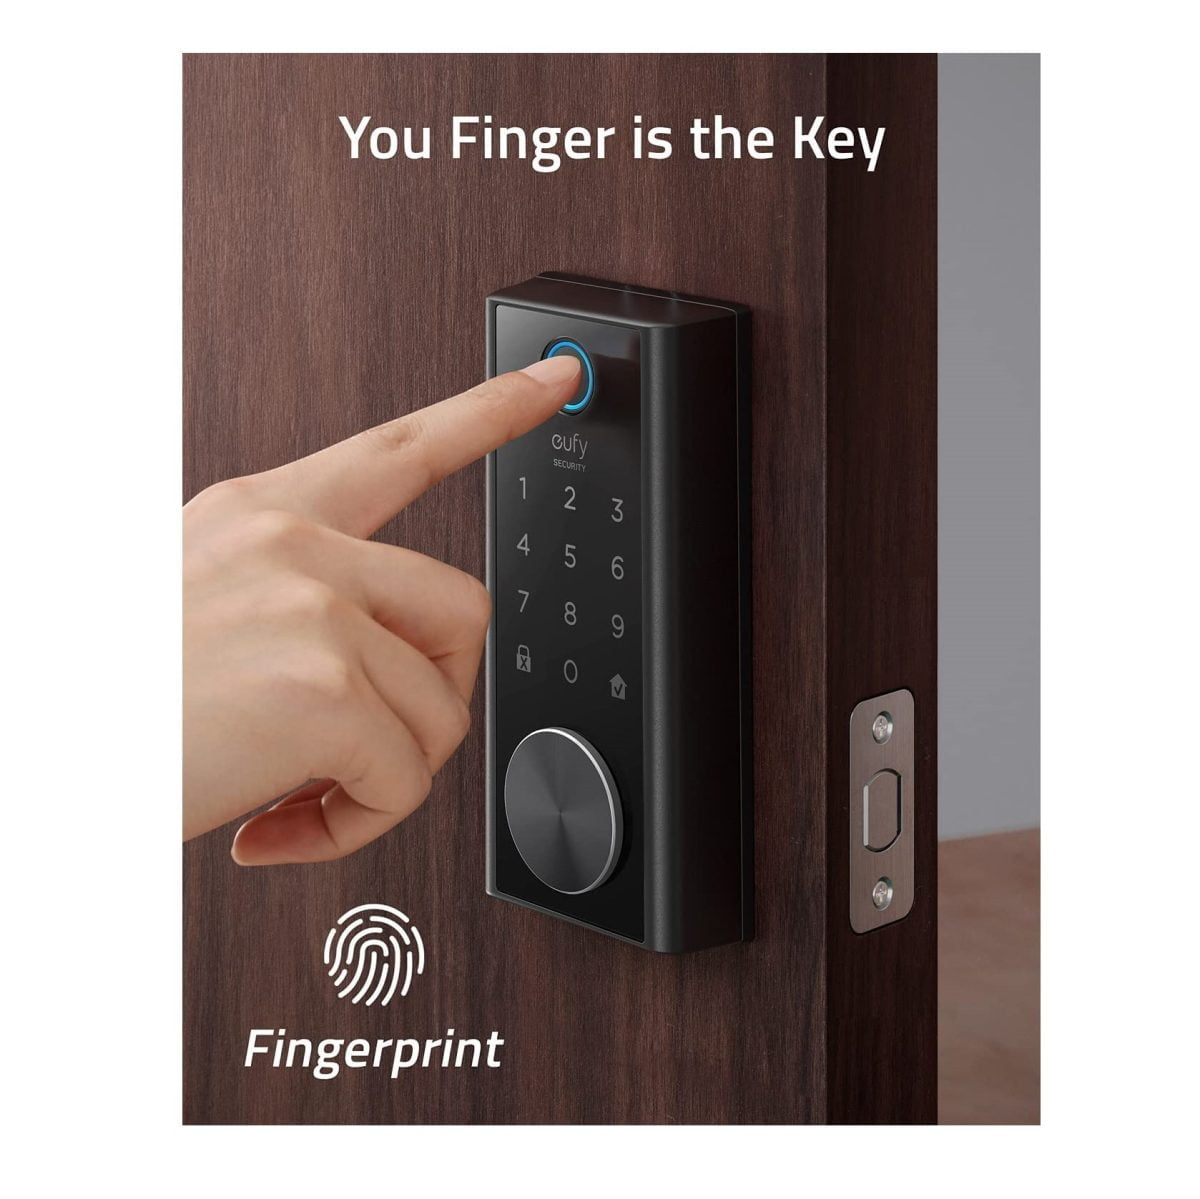 71Wwrr0W95L. Ac Sl1500 Eufy &Lt;H1 Class=&Quot;Product-Meta__Title Heading H1&Quot;&Gt;Eufy Security Smart Lock Touch And Wi-Fi&Lt;/H1&Gt; Https://Www.youtube.com/Watch?V=A_Ctk37Uap0 &Lt;Ul&Gt; &Lt;Li Class=&Quot;&Quot; Data-List=&Quot;Bullet1&Quot; Data-Start=&Quot;1&Quot;&Gt;&Lt;Strong&Gt;Your Finger Is The Key:&Lt;/Strong&Gt; Smart Lock Recognizes Your Fingerprint In Just 0.3 Seconds And Unlocks Your Door In 1 Second—It’s Faster Than Fumbling For Your Keys.&Lt;/Li&Gt; &Lt;/Ul&Gt; &Lt;Ul&Gt; &Lt;Li Class=&Quot;&Quot; Data-List=&Quot;Bullet1&Quot; Data-Start=&Quot;1&Quot;&Gt;&Lt;Strong&Gt;Control From Anywhere:&Lt;/Strong&Gt; With Its All-New Wi-Fi Connectivity, You Can Control Smart Lock From Absolutely Anywhere Via The Eufy Security App.&Lt;/Li&Gt; &Lt;/Ul&Gt; &Lt;Ul&Gt; &Lt;Li Class=&Quot;&Quot; Data-List=&Quot;Bullet1&Quot; Data-Start=&Quot;1&Quot;&Gt;&Lt;Strong&Gt;Always Has Your Back:&Lt;/Strong&Gt; Even When You’re In A Hurry, Smart Lock Is Ready To Protect Your Home. A Built-In Sensor Detects When Your Door Is Closed And Locks It Automatically Behind You, Every Time.&Lt;/Li&Gt; &Lt;/Ul&Gt; &Lt;Ul&Gt; &Lt;Li Class=&Quot;&Quot; Data-List=&Quot;Bullet1&Quot; Data-Start=&Quot;1&Quot;&Gt;&Lt;Strong&Gt;Multiple Ways To Unlock:&Lt;/Strong&Gt; Open Smart Lock Using Your Fingerprint, With Your Phone Via The Eufy Security App, Or By Using The Keypad Or Key.&Lt;/Li&Gt; &Lt;/Ul&Gt; &Lt;Ul&Gt; &Lt;Li Class=&Quot;&Quot; Data-List=&Quot;Bullet1&Quot; Data-Start=&Quot;1&Quot;&Gt;&Lt;Strong&Gt;Built To Last:&Lt;/Strong&Gt; With A Sturdy Zinc Alloy And Stainless Steel Frame, Smart Lock Is Tested To Handle The Comings And Goings Of A Busy Household For Over 30 Years. The Ip65 Rating Ensures That Come Rain Or Shine, Your Front Door Is Protected.&Lt;/Li&Gt; &Lt;/Ul&Gt; &Lt;H5&Gt;Warranty: Eufy Product Warranty&Lt;/H5&Gt; Smart Lock Eufy Security Smart Lock Touch And Wi-Fi T8520111